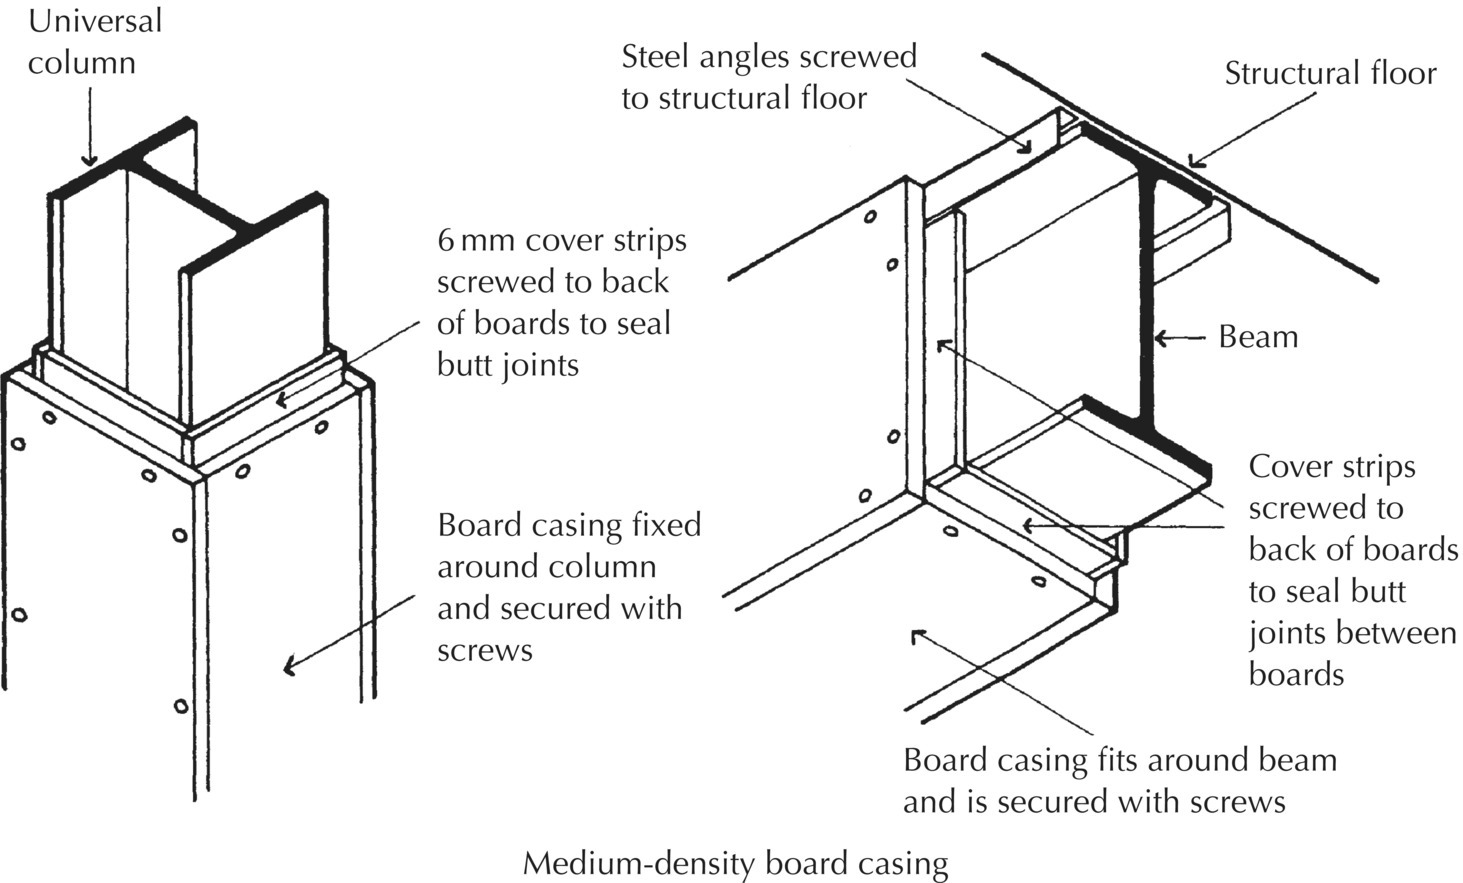 Diagrams of column (left) and beam (right) with arrows to structural floor, steel angles screwed to structural floor, board casing fits around column and beam and secured with screws, etc.